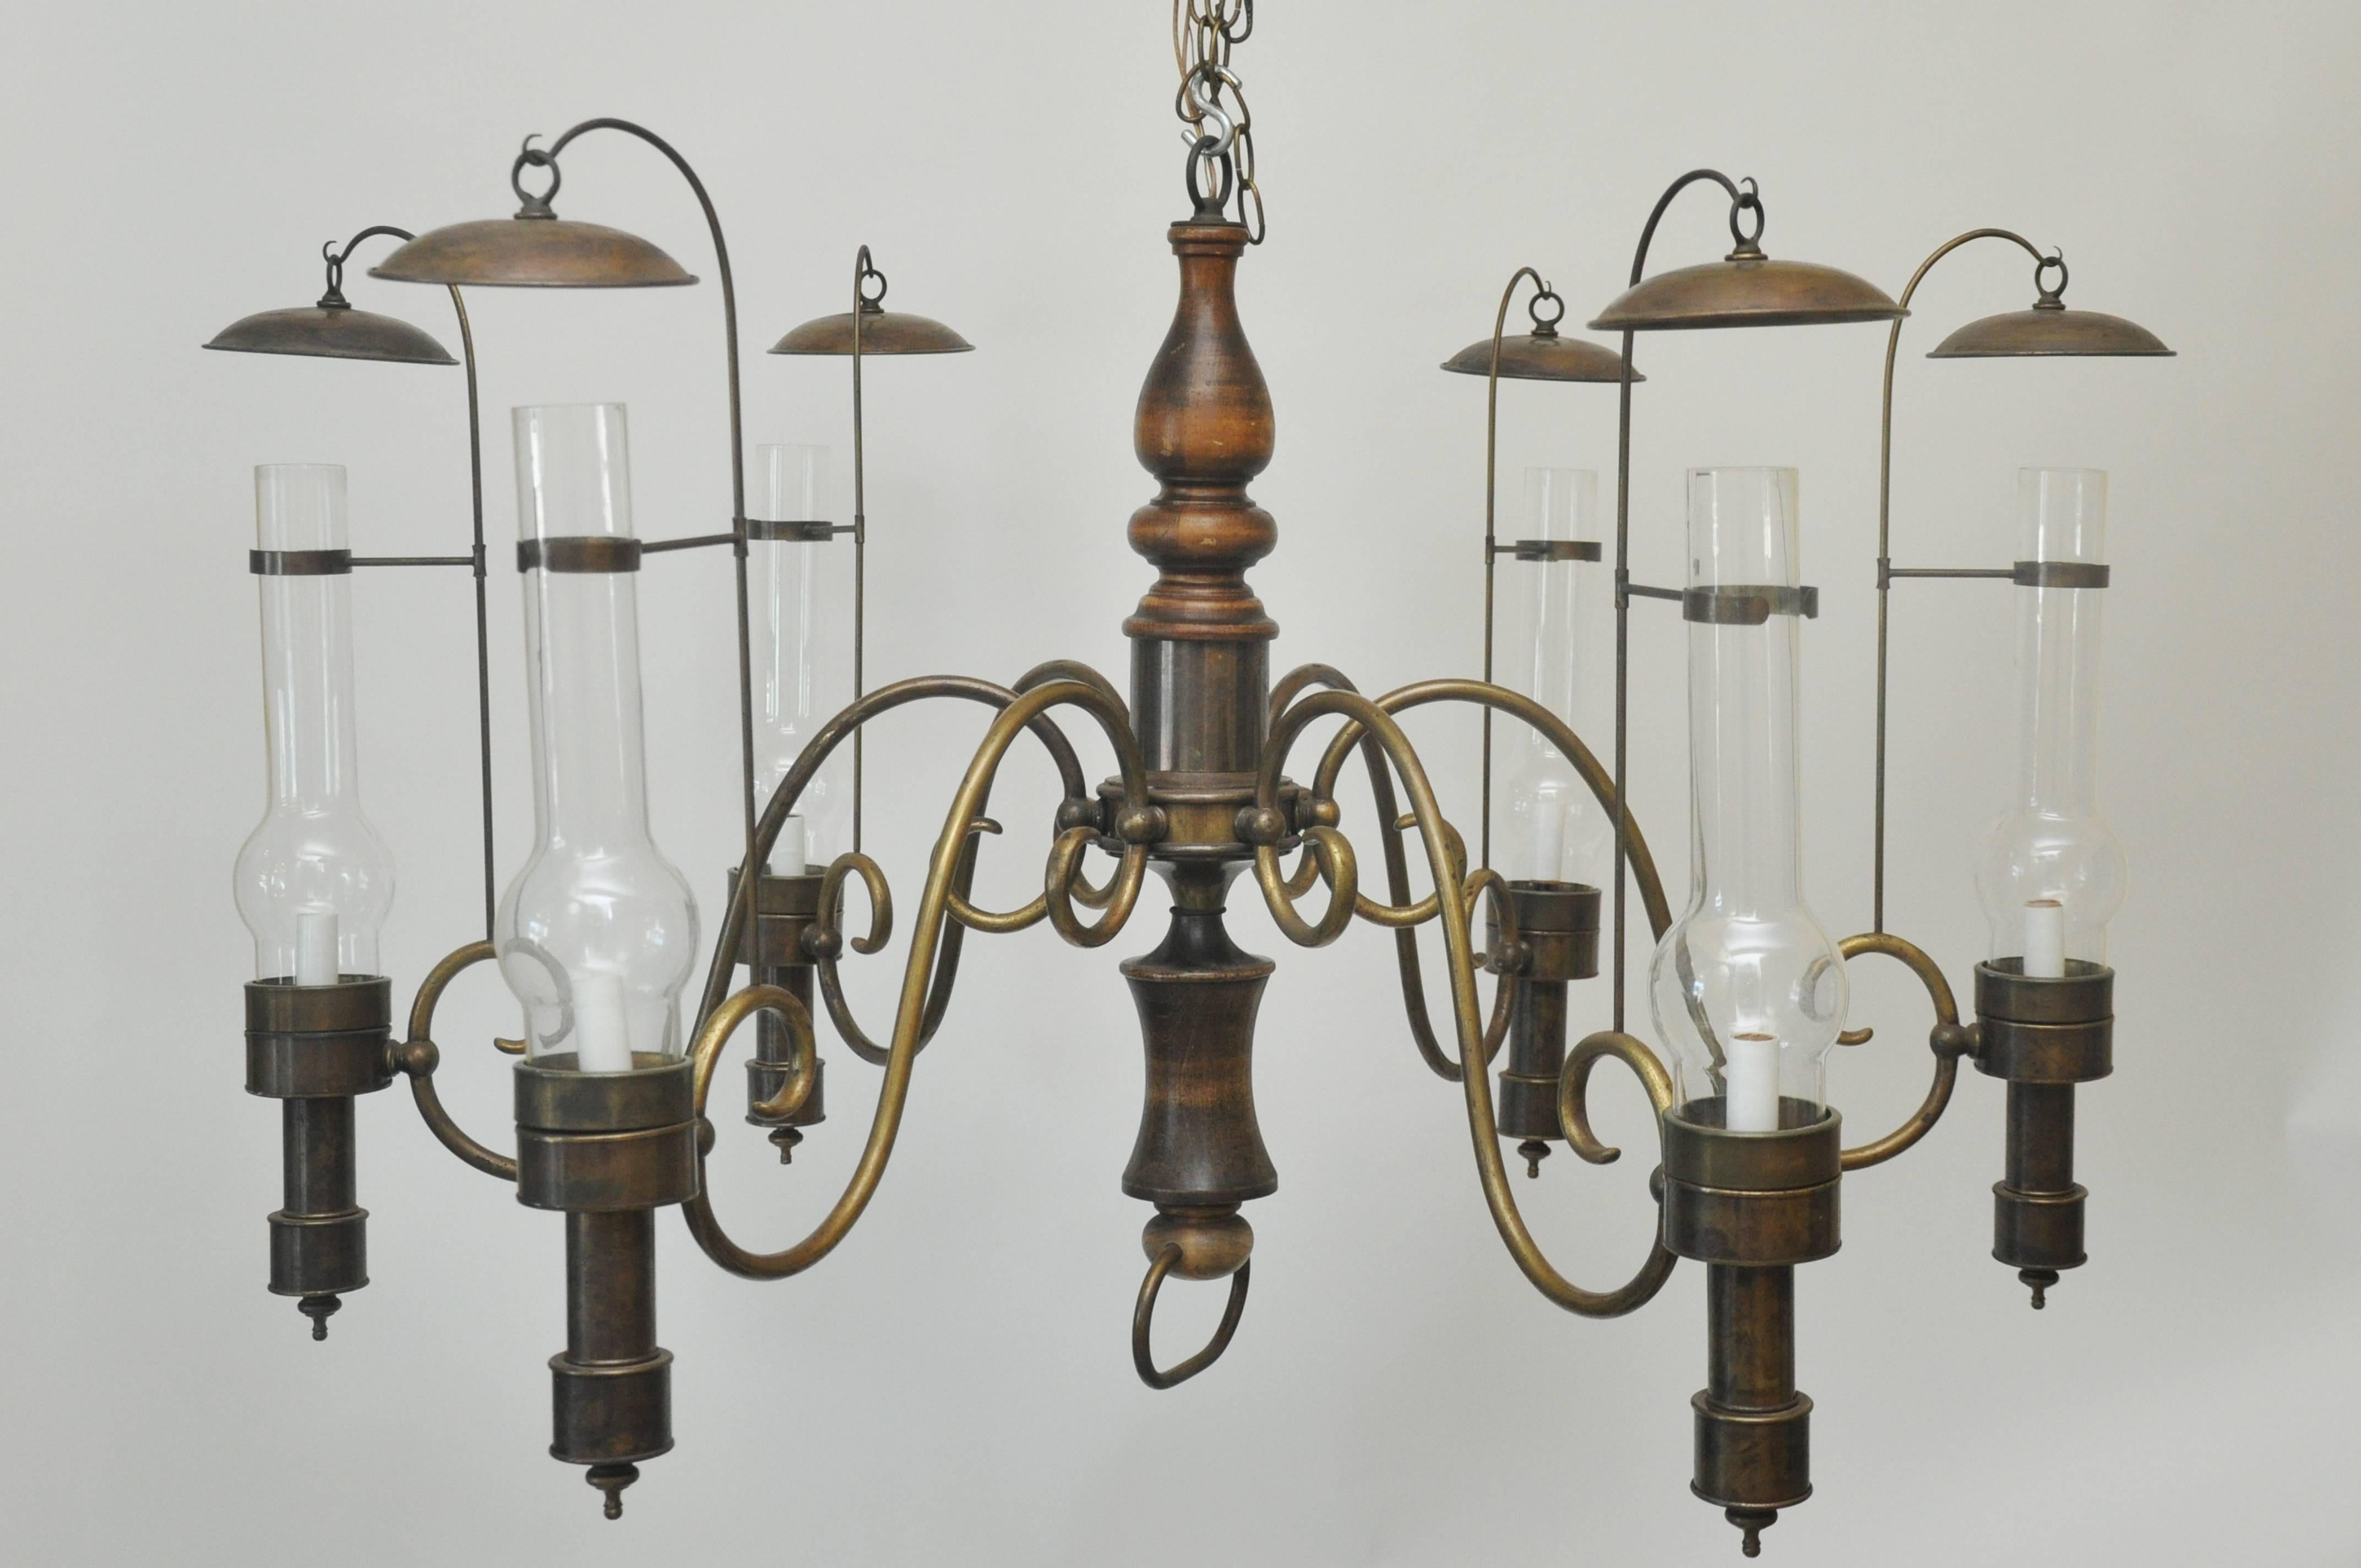 Large-scale chandelier. Possibly a commercial chandelier from a store or restaurant vintage the 1960s. Measures: 42" diameter.